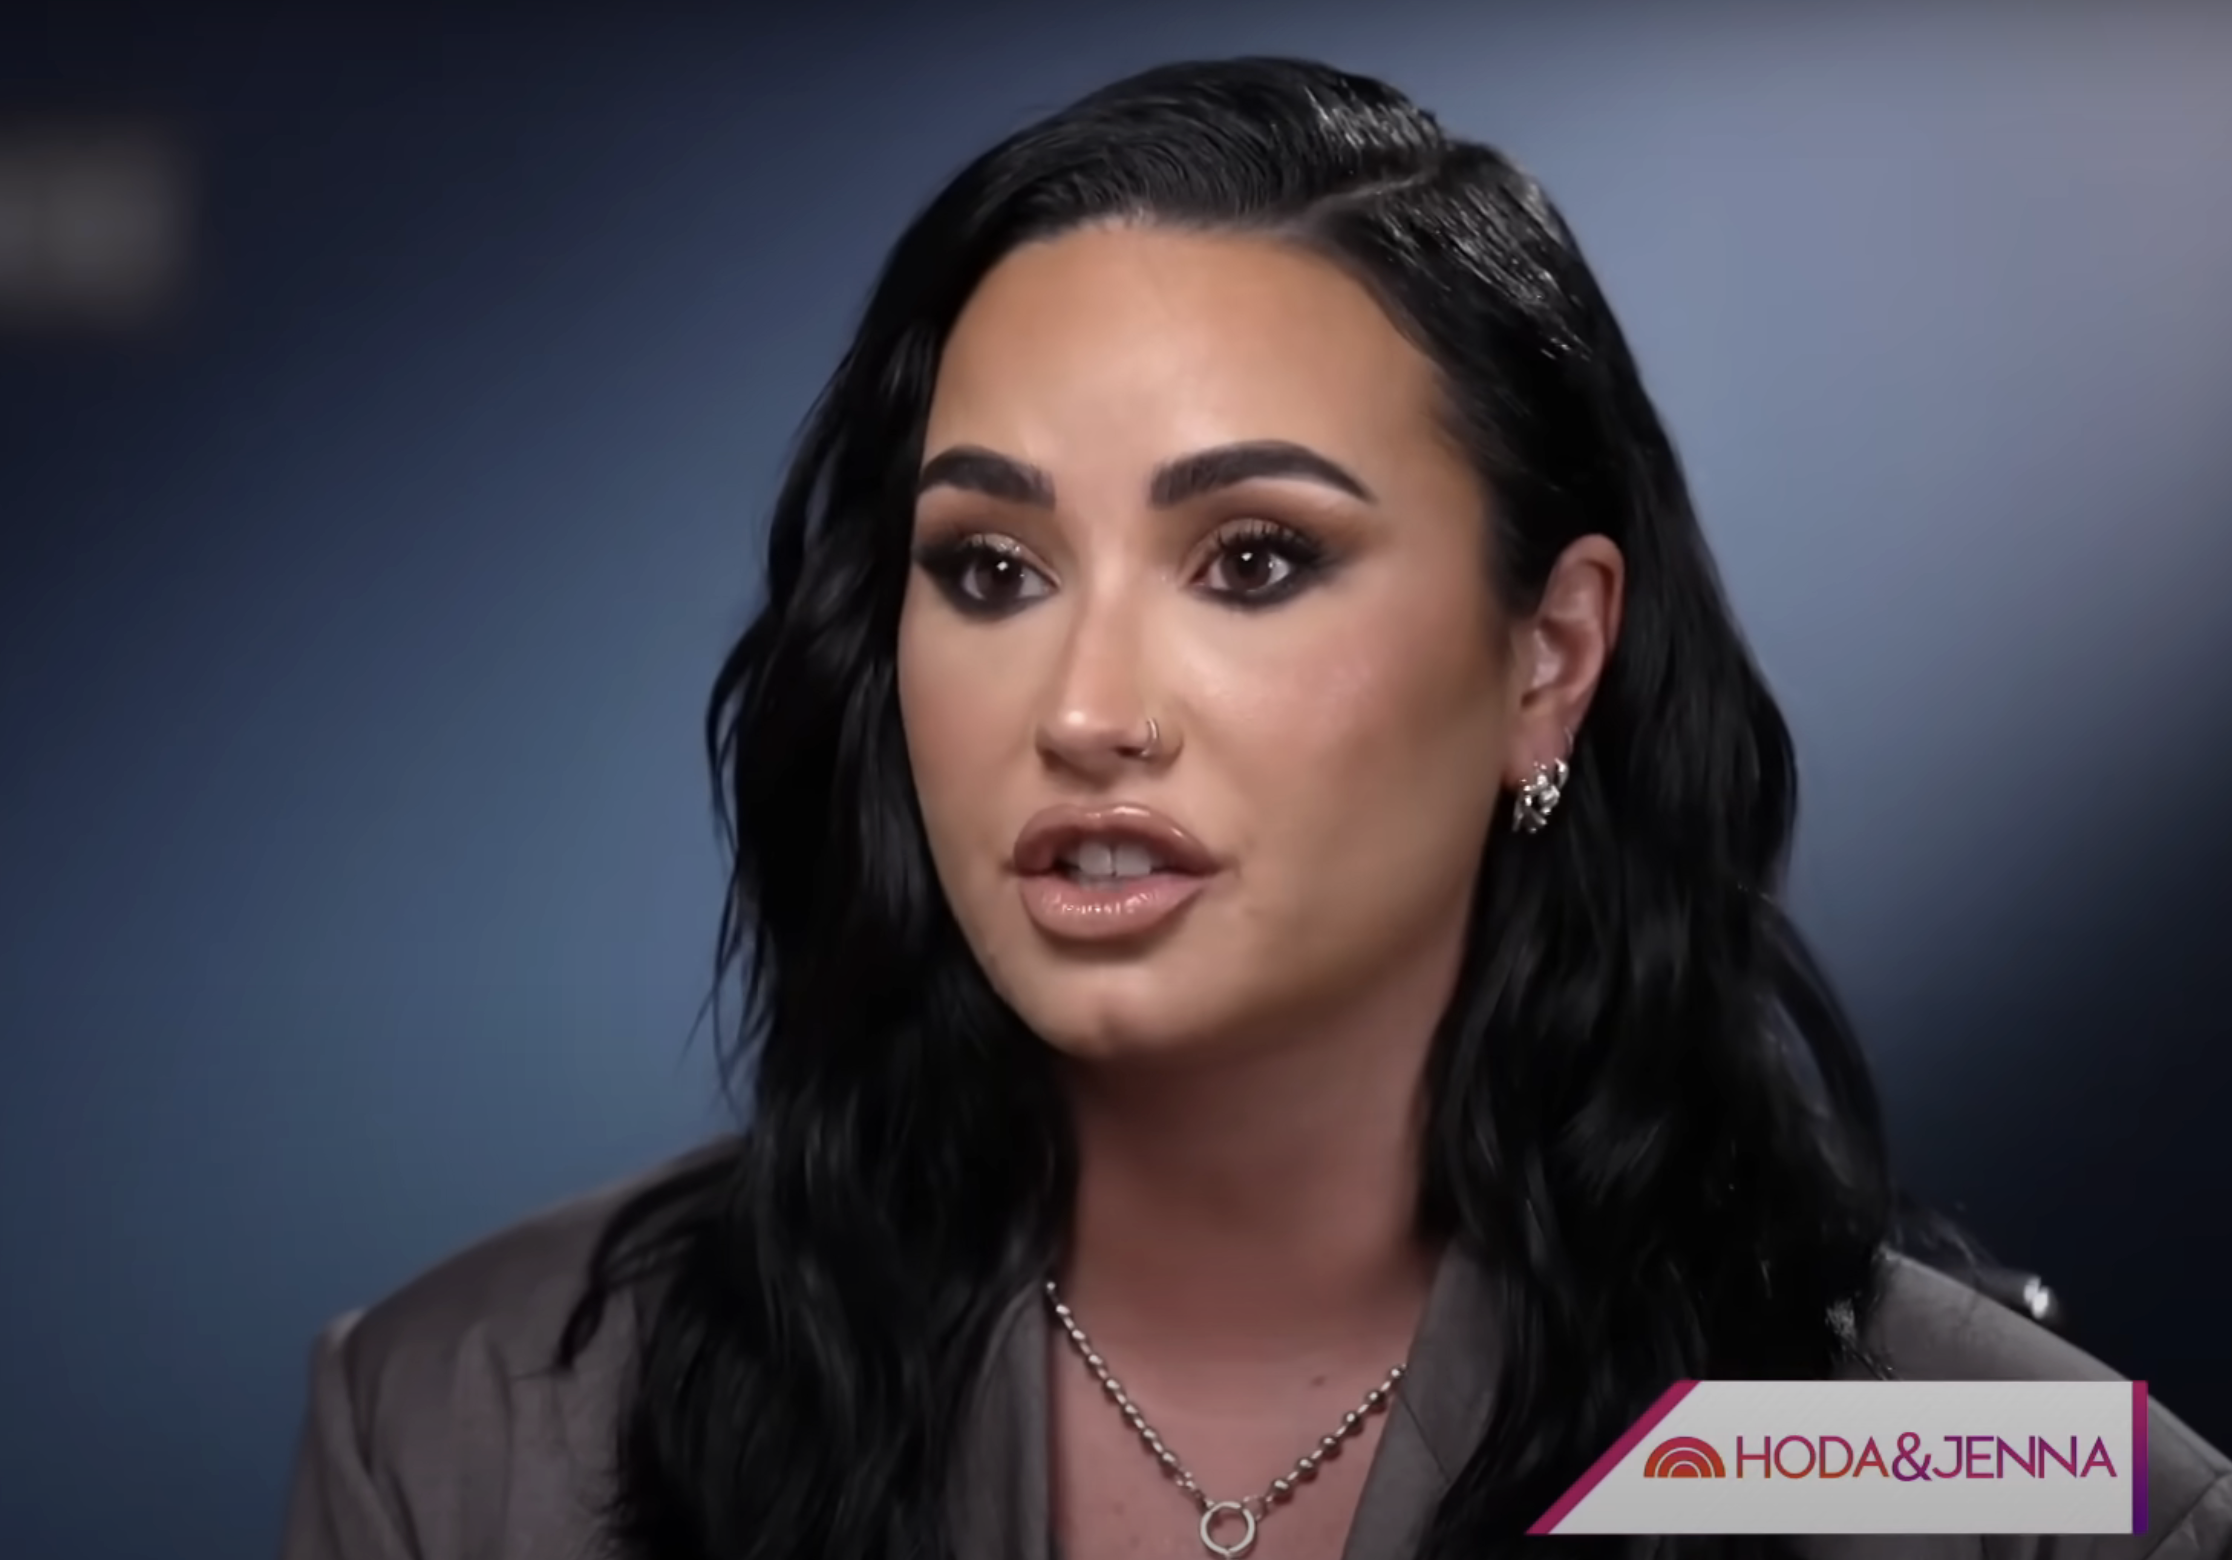 Demi Lovato in a close-up interview, wearing a structured top and silver chain necklace